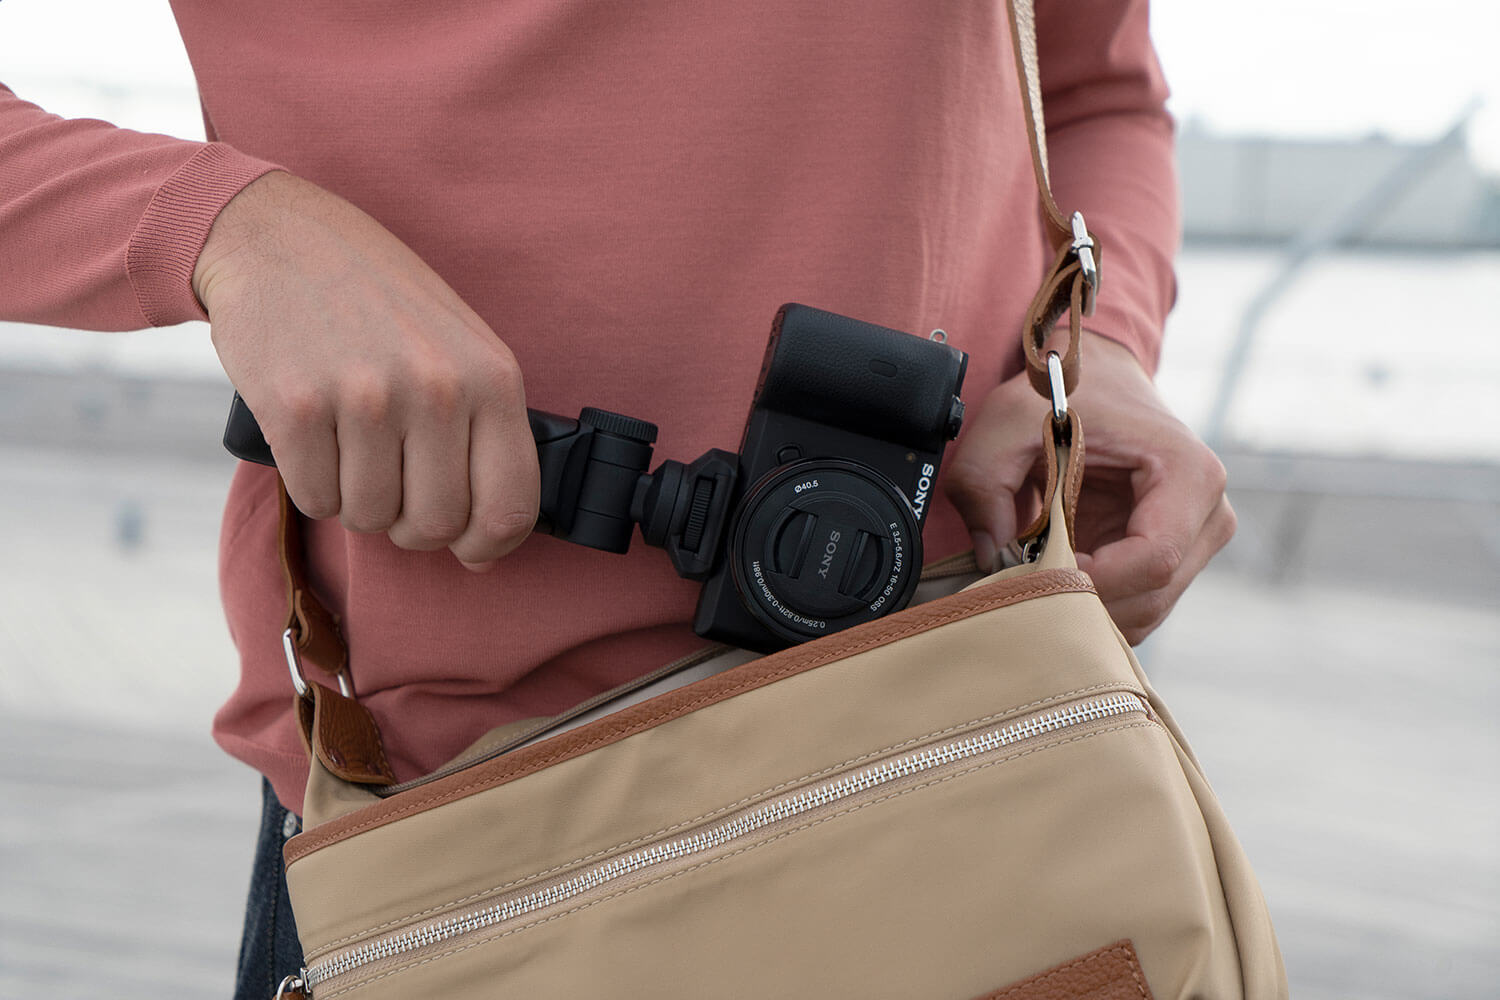 Image of camera on shooting grip being placed into carry bag